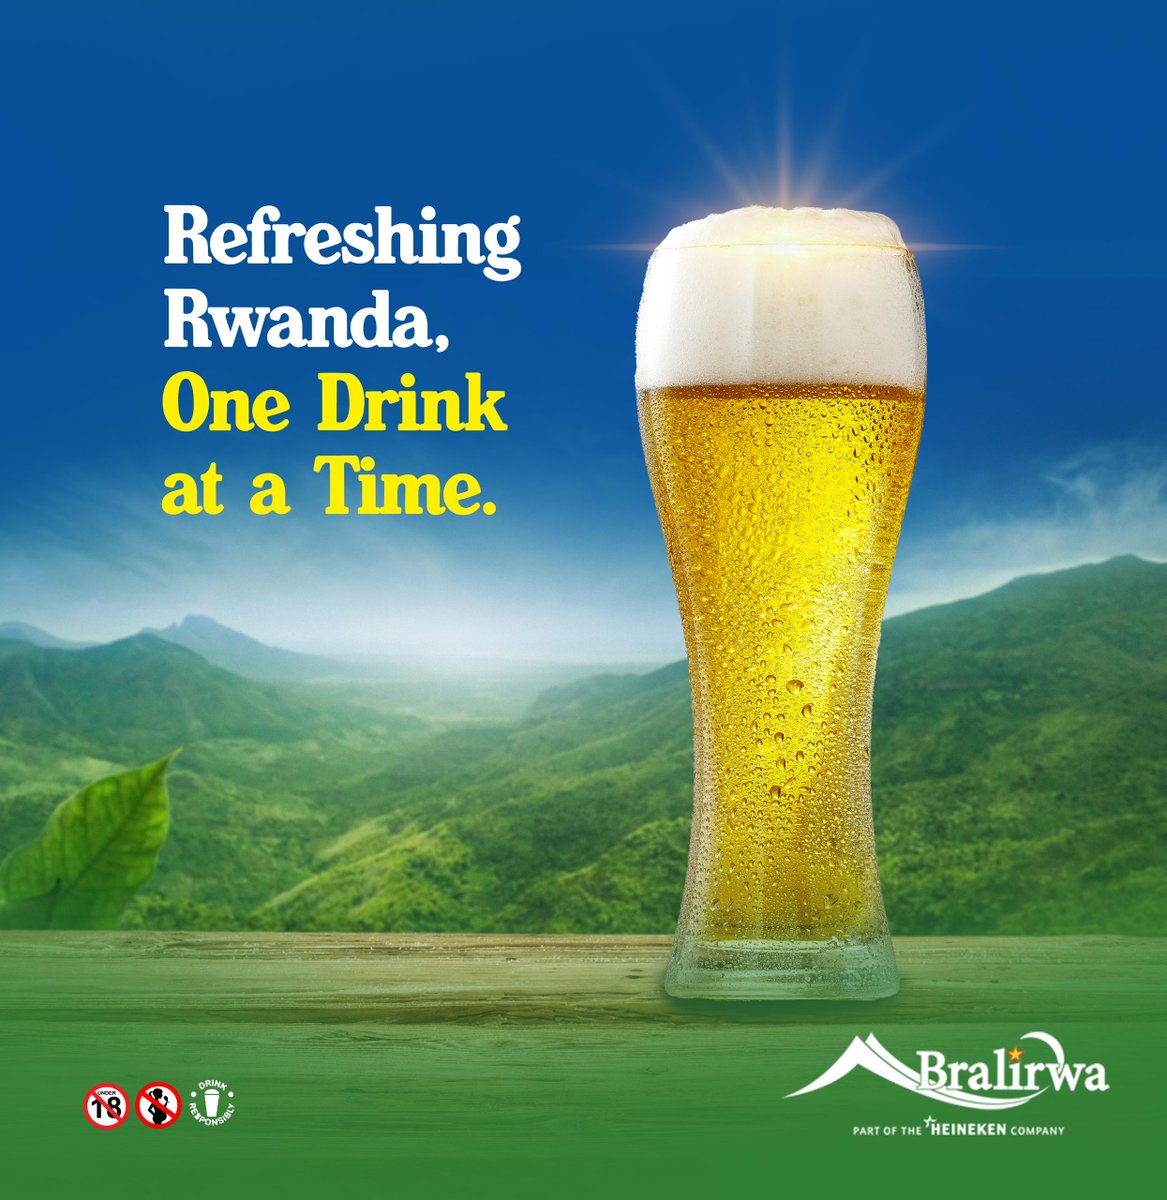 Whether you like your cold beer, sparkling water, or icy soda, you can trust Bralirwa to deliver the refreshment. #drinkresponsibly #webrewthejoyoftruetogetherness #weareheineken